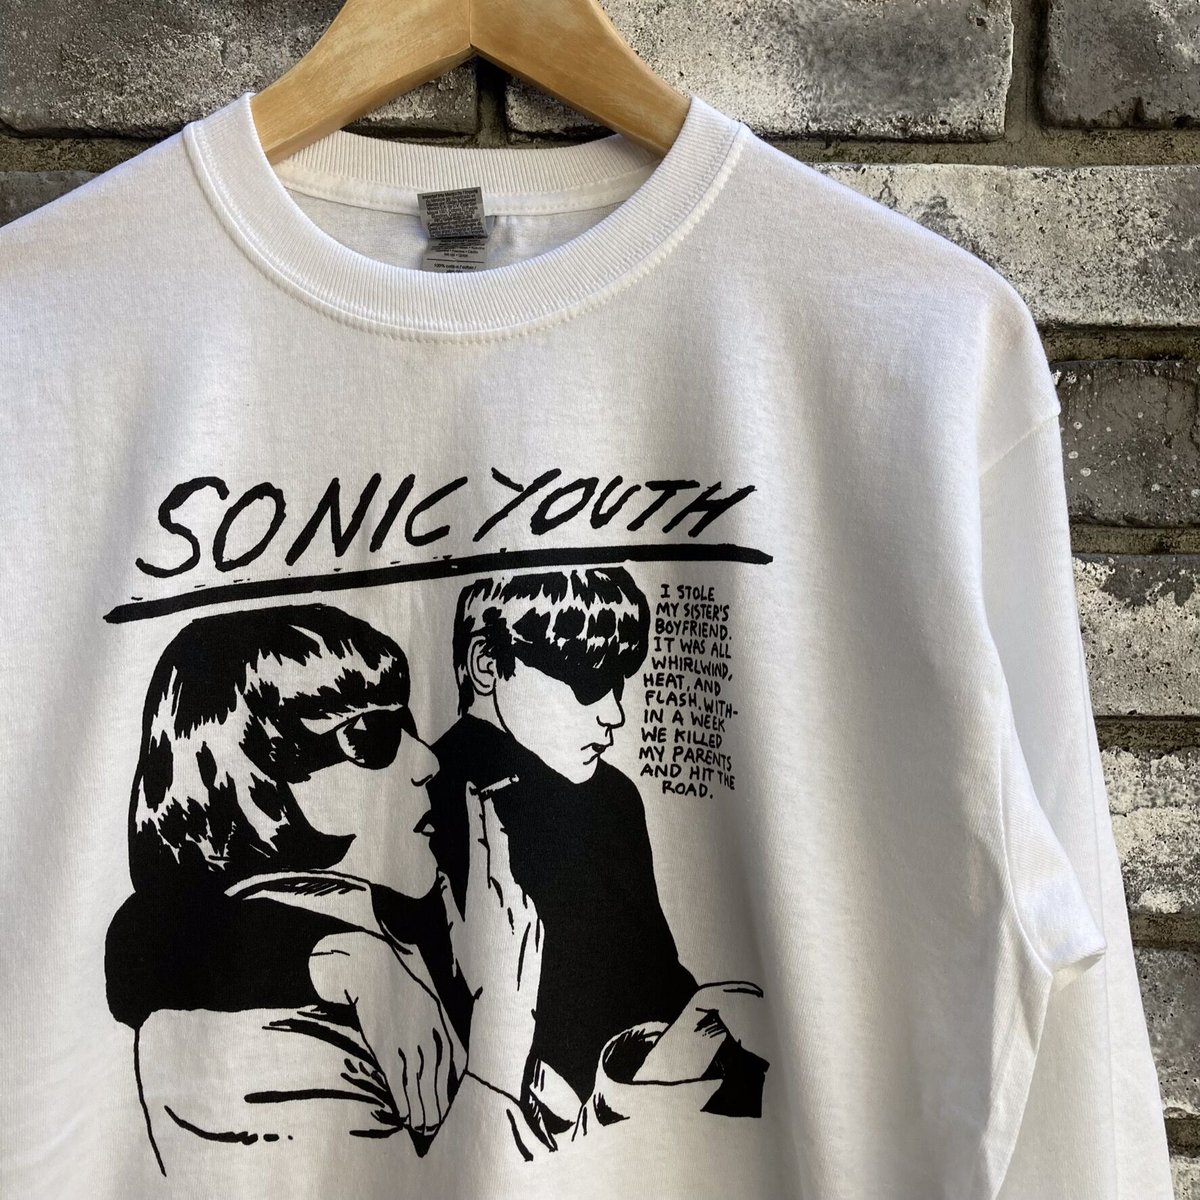 SONIC YOUTH】 “GOO” L/S Tee ソニックユース | LILY Onli...